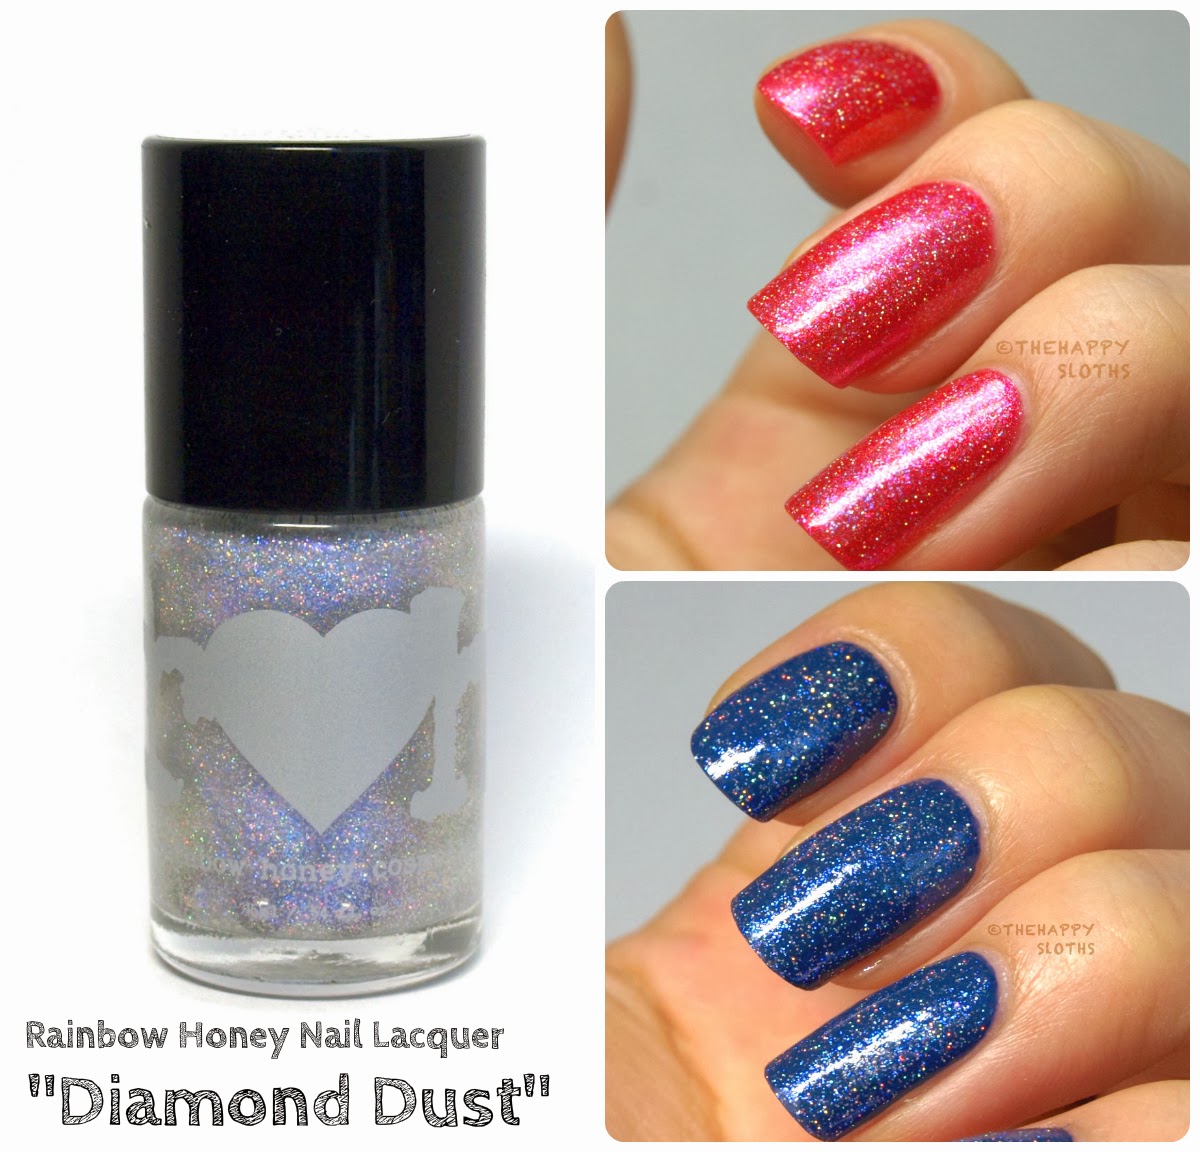 Rainbow Honey Nail Lacquer in Diamond Dust: Review and Swatches